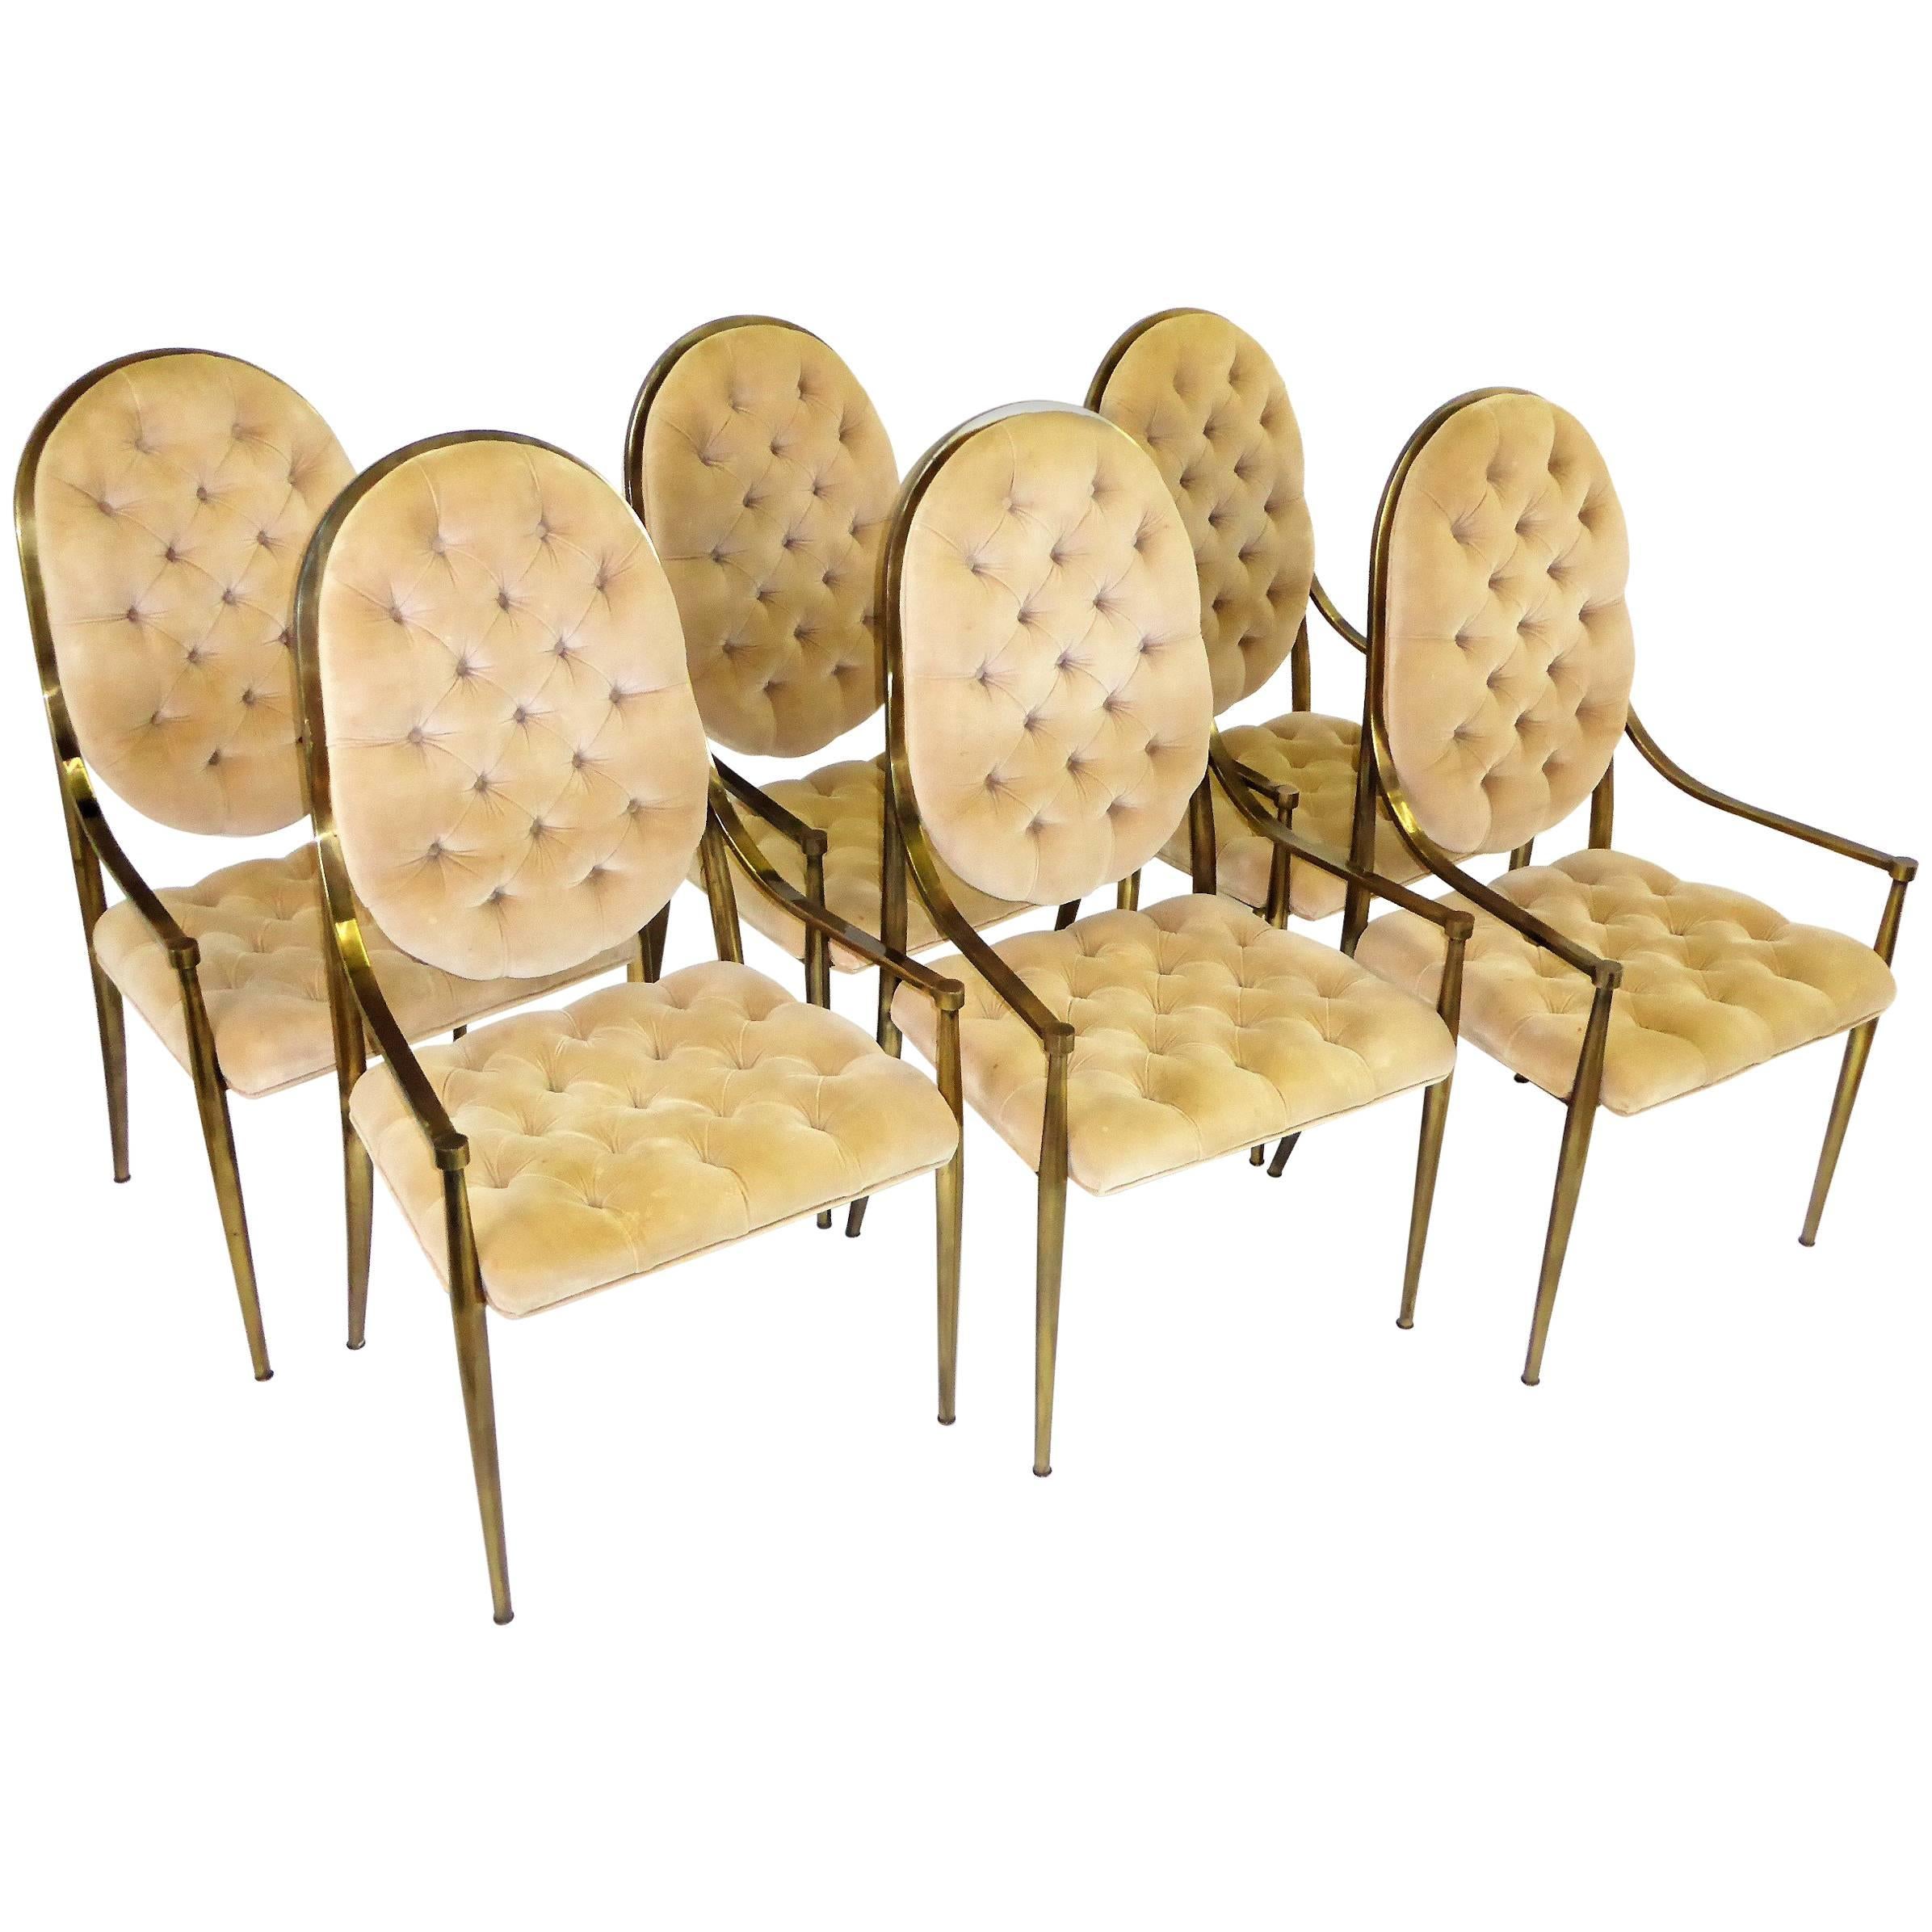 Six 1960s Mastercraft Antiqued Brass Tufted Velvet Dining Chairs